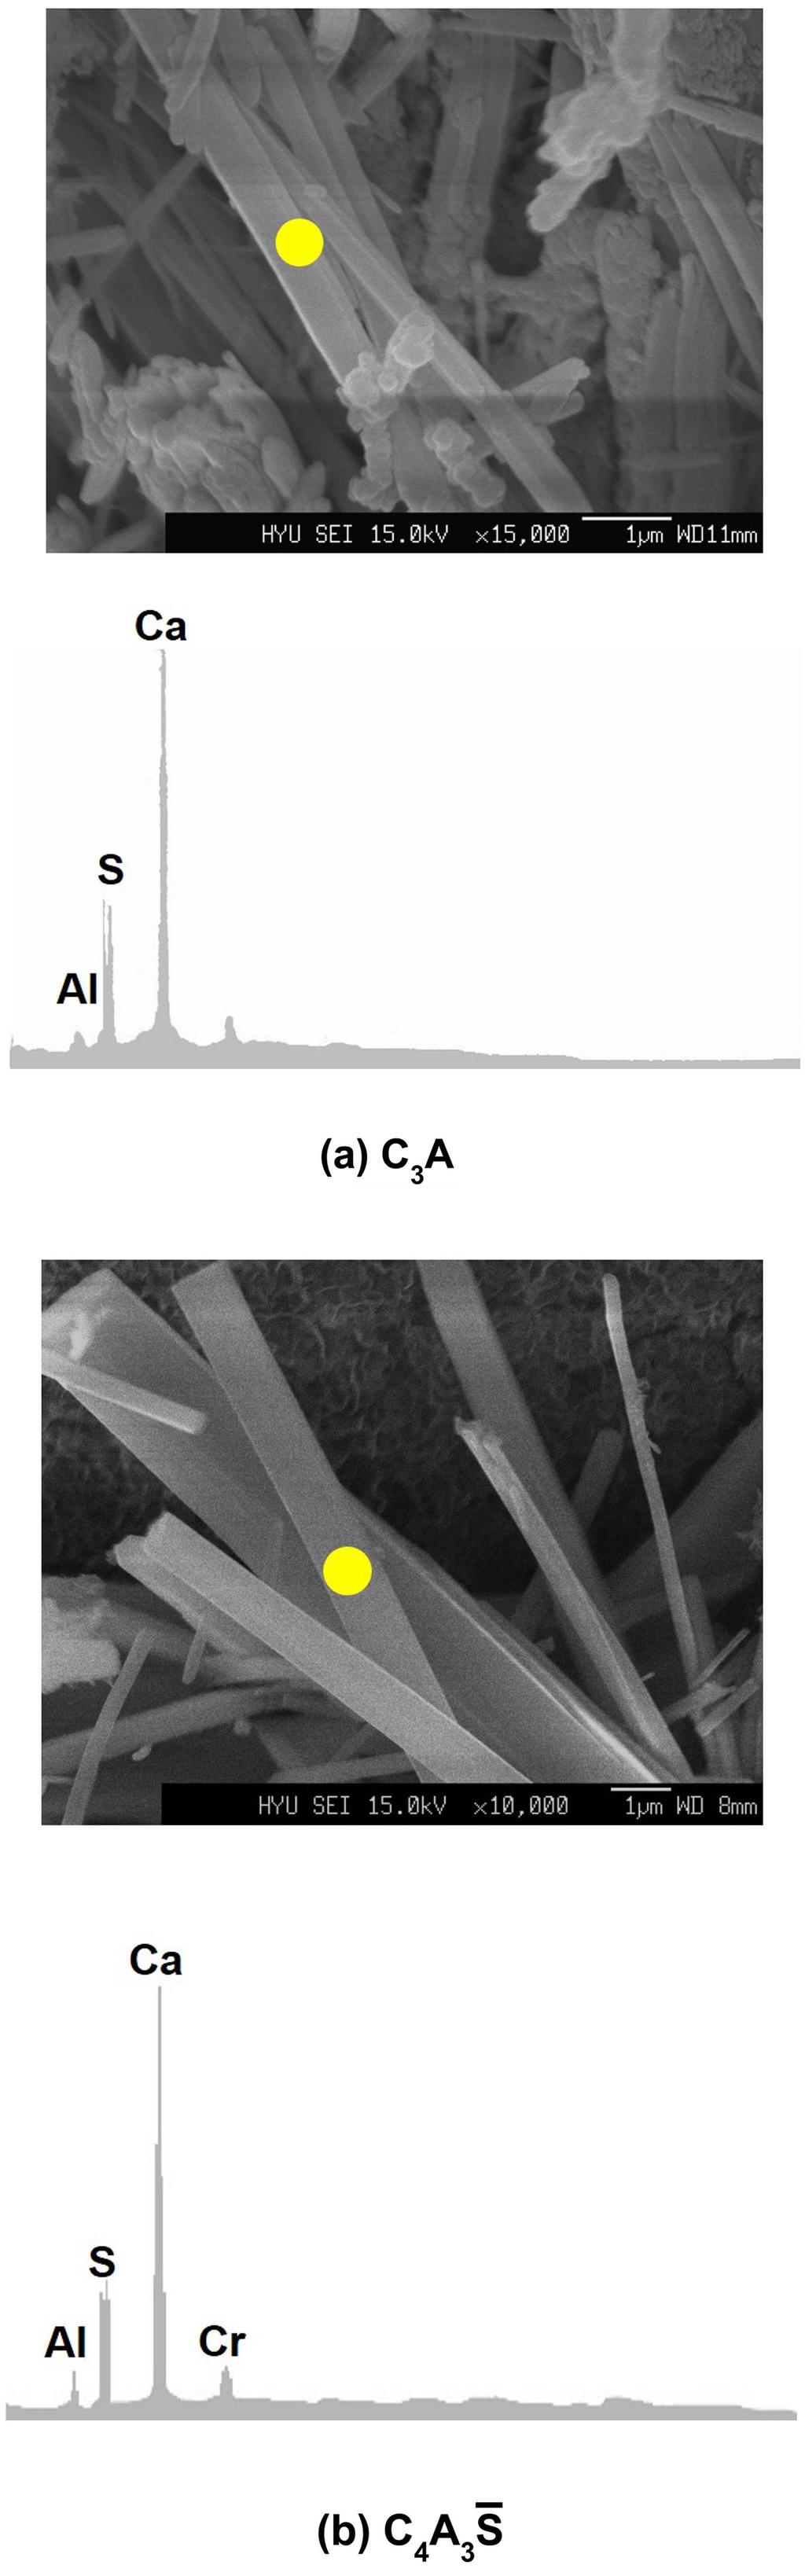 Influence of lead and chromium ions as toxic heavy metals between AFt and AFm phases based on C 3 A and C 4 A 3 S 543 Fig. 10.